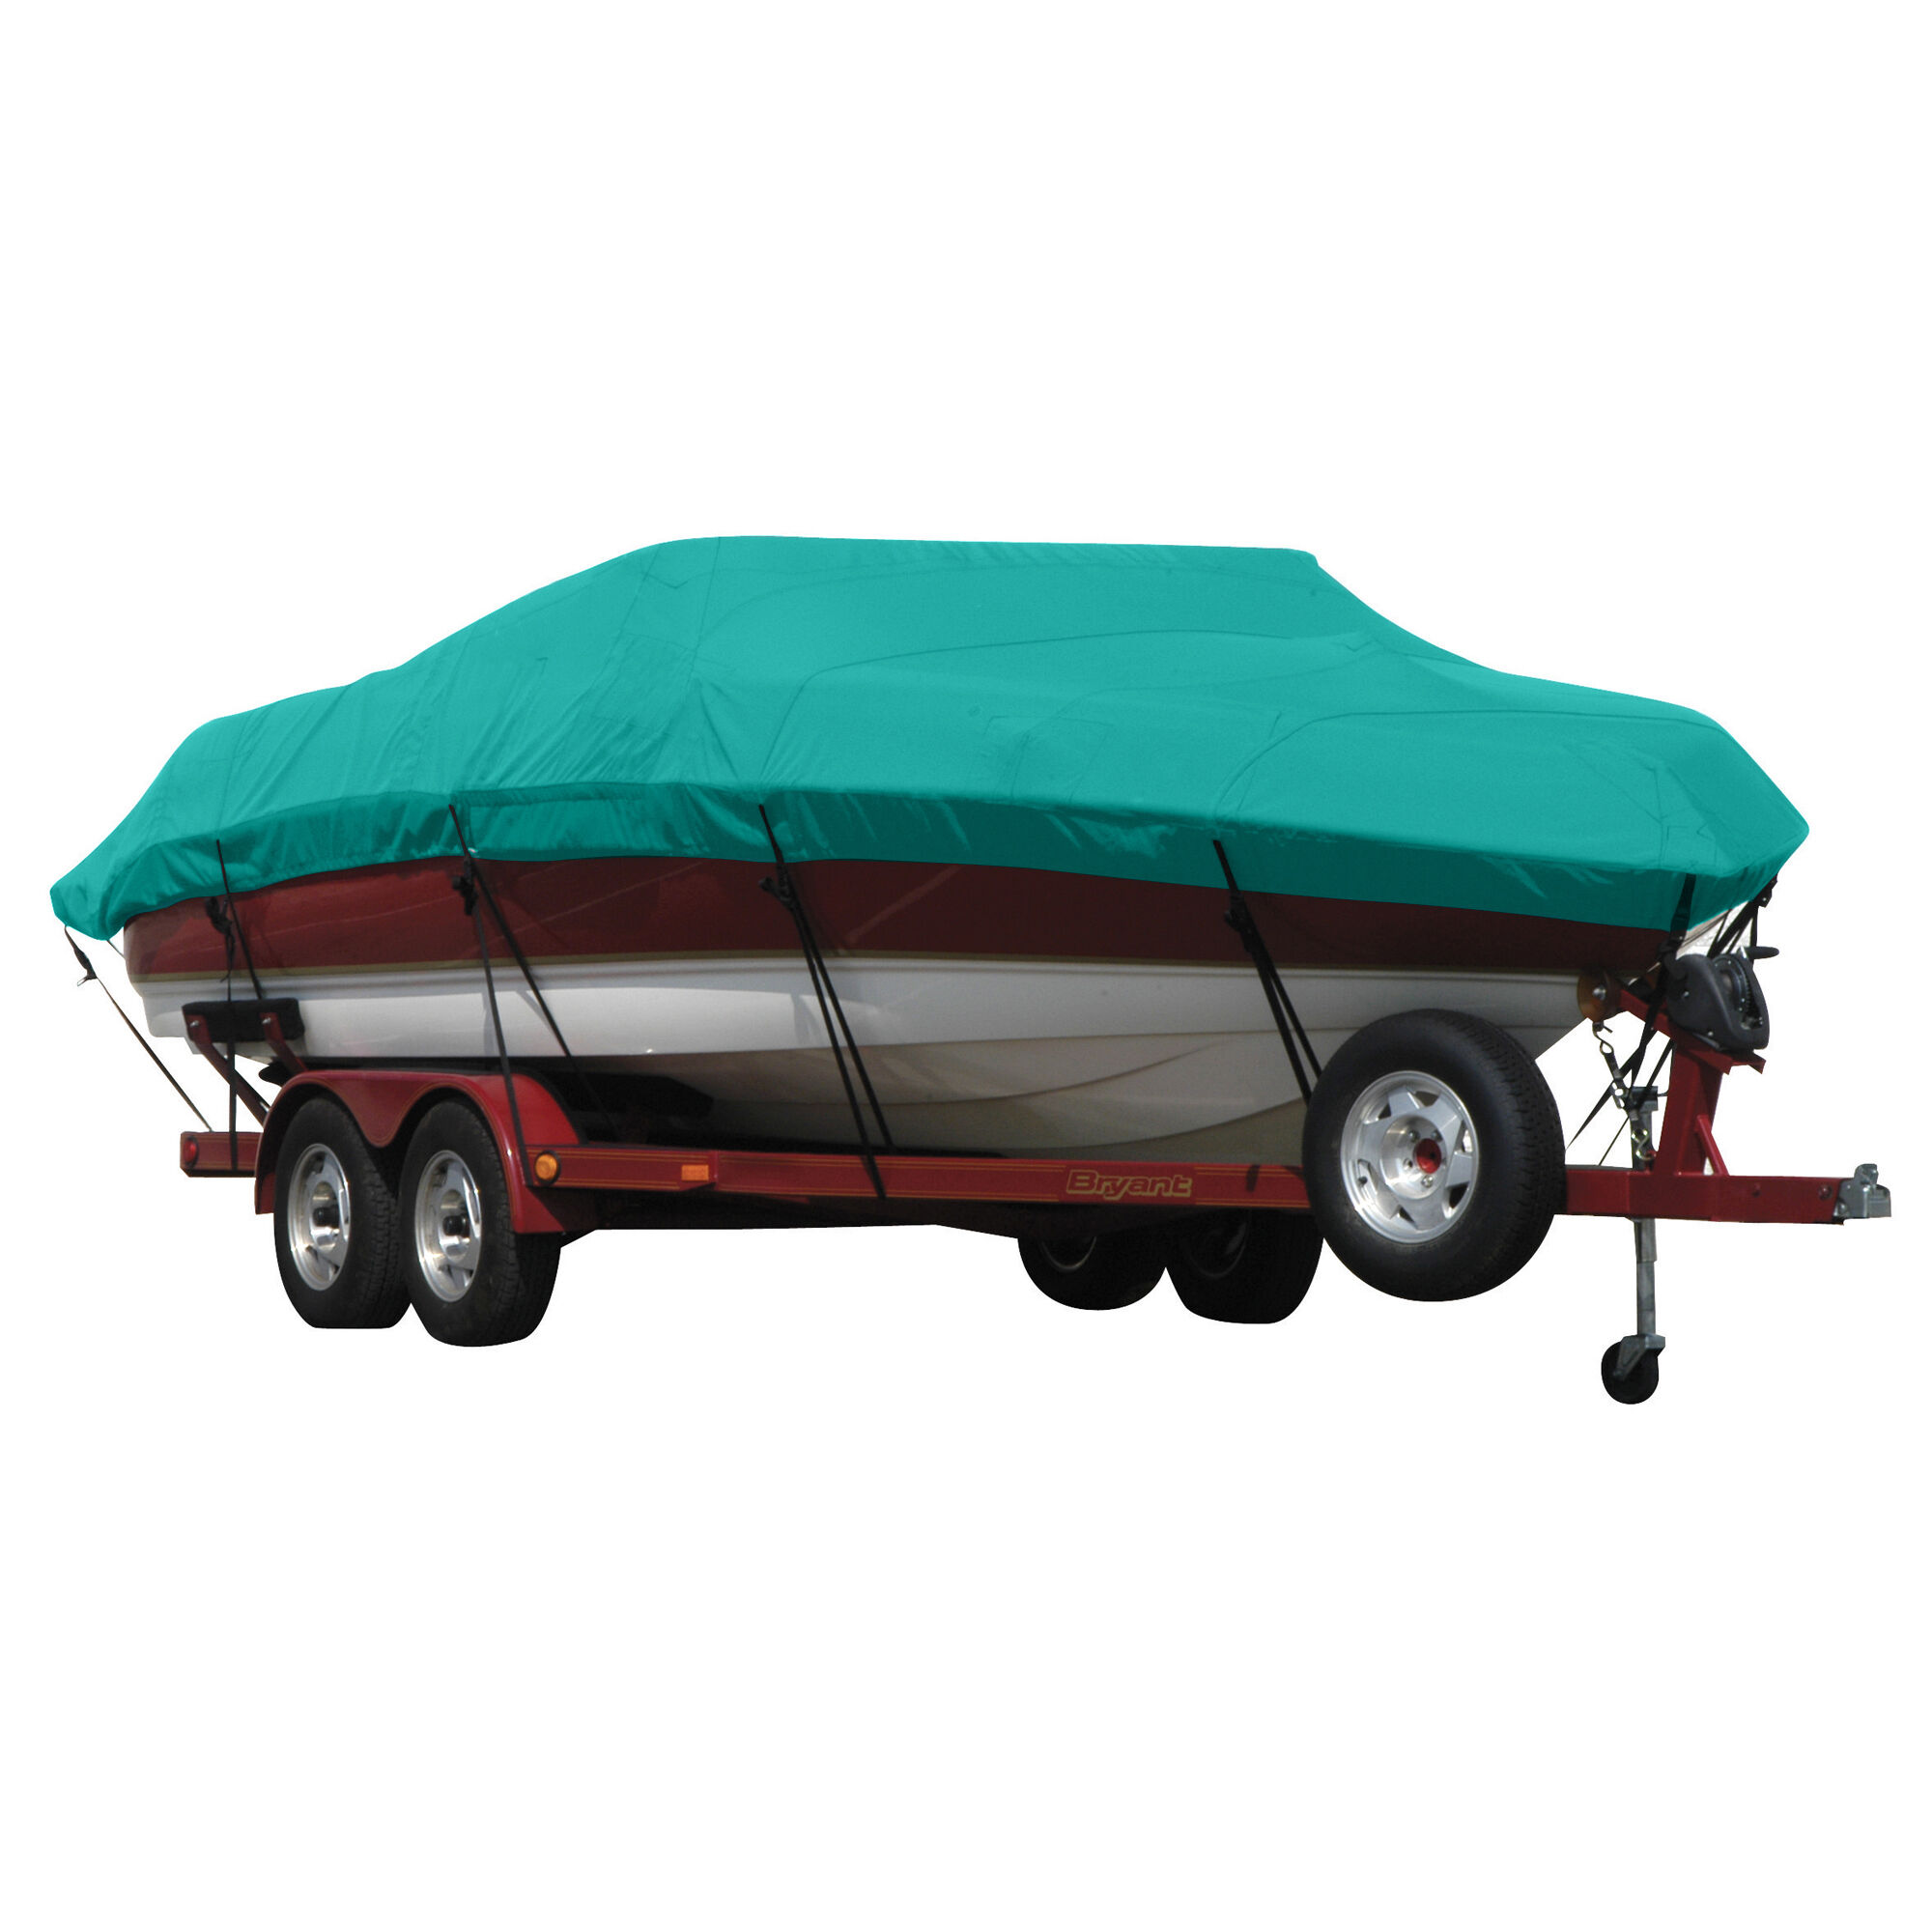 Covermate Exact Fit Sunbrella Boat Cover for Campion Chase 910 Zri Chase 910 Zri Cc I/O. Persian Green